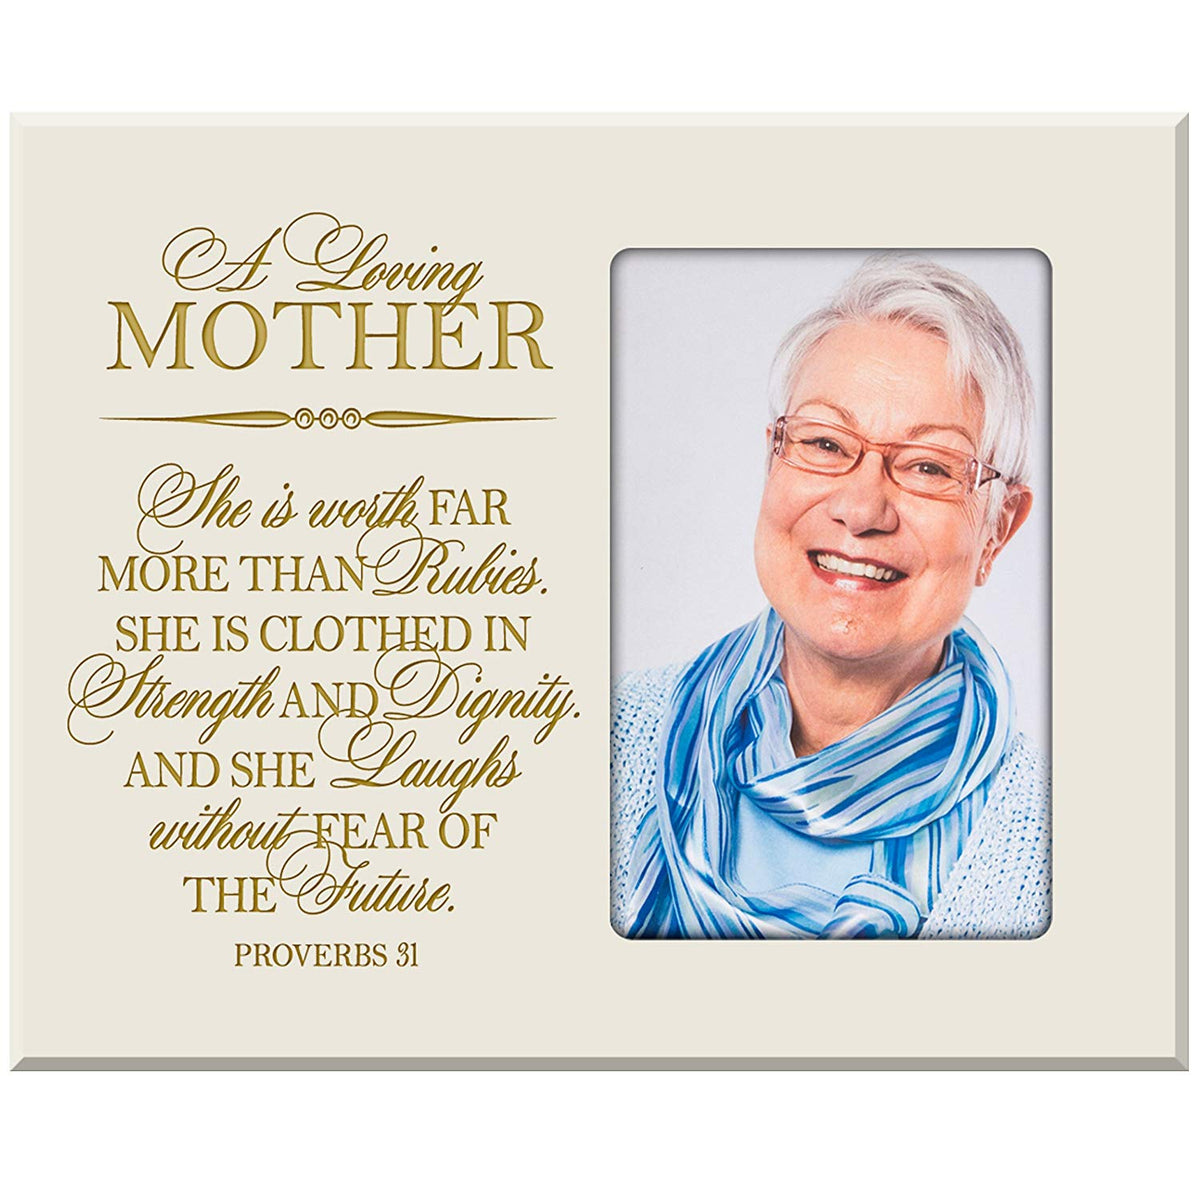 Mothers Day Picture Frame Gift - Proverbs 31 - LifeSong Milestones